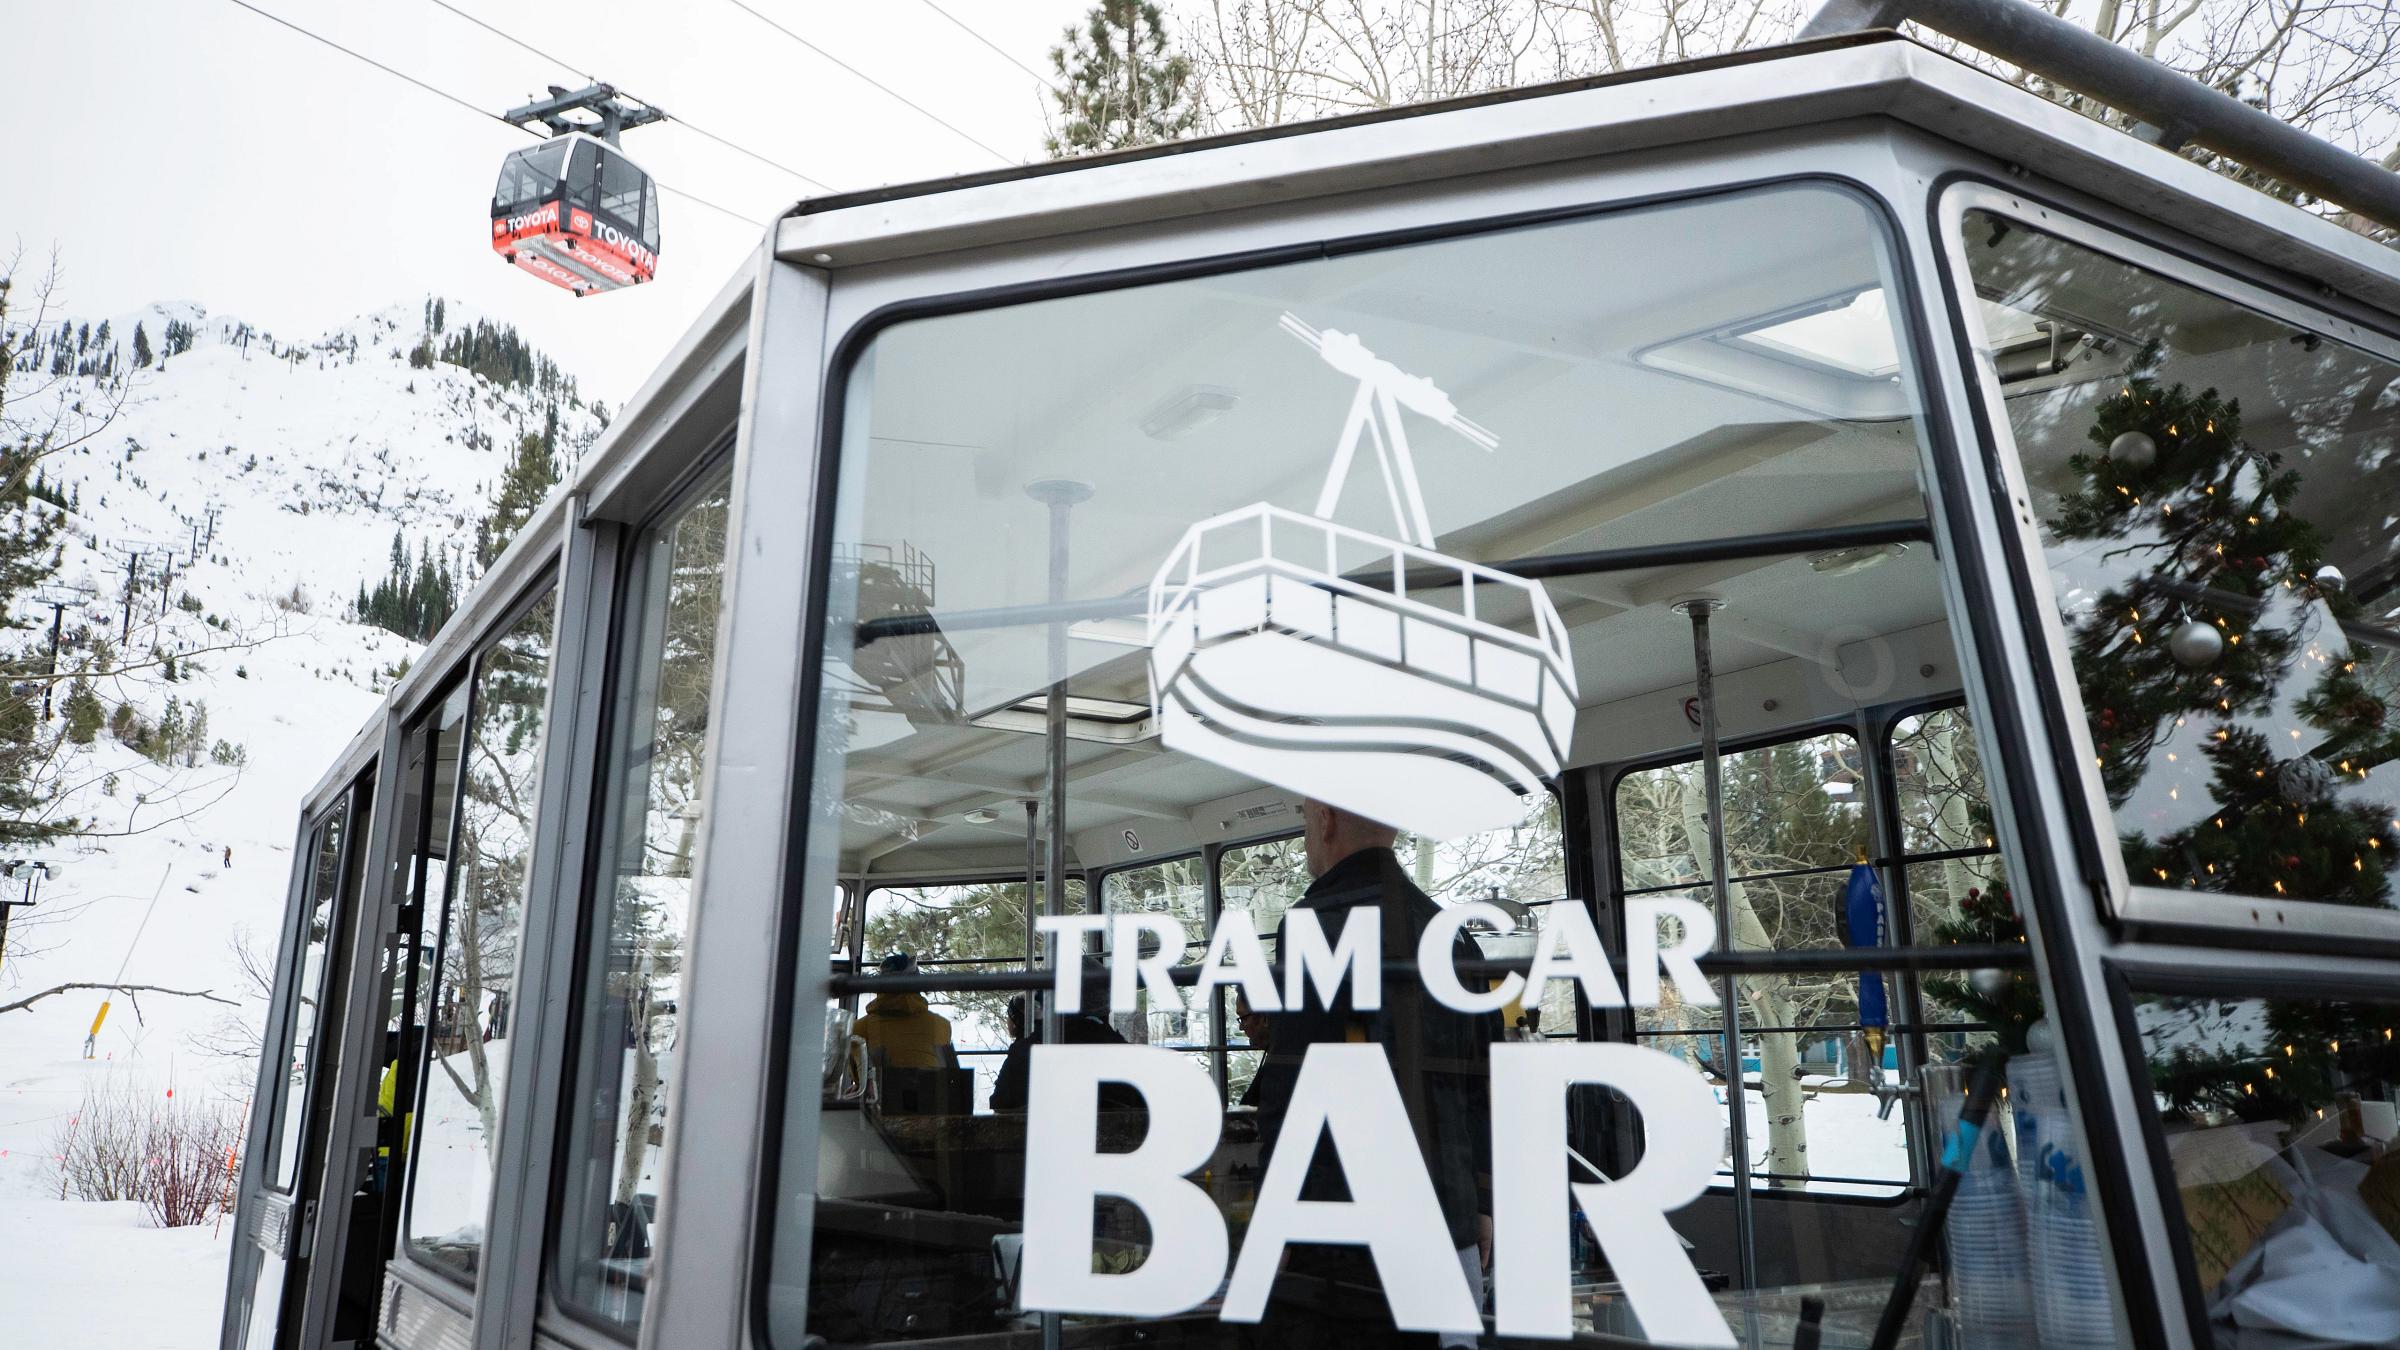 The retro Tram Car Bar in The Village at Squaw Valley